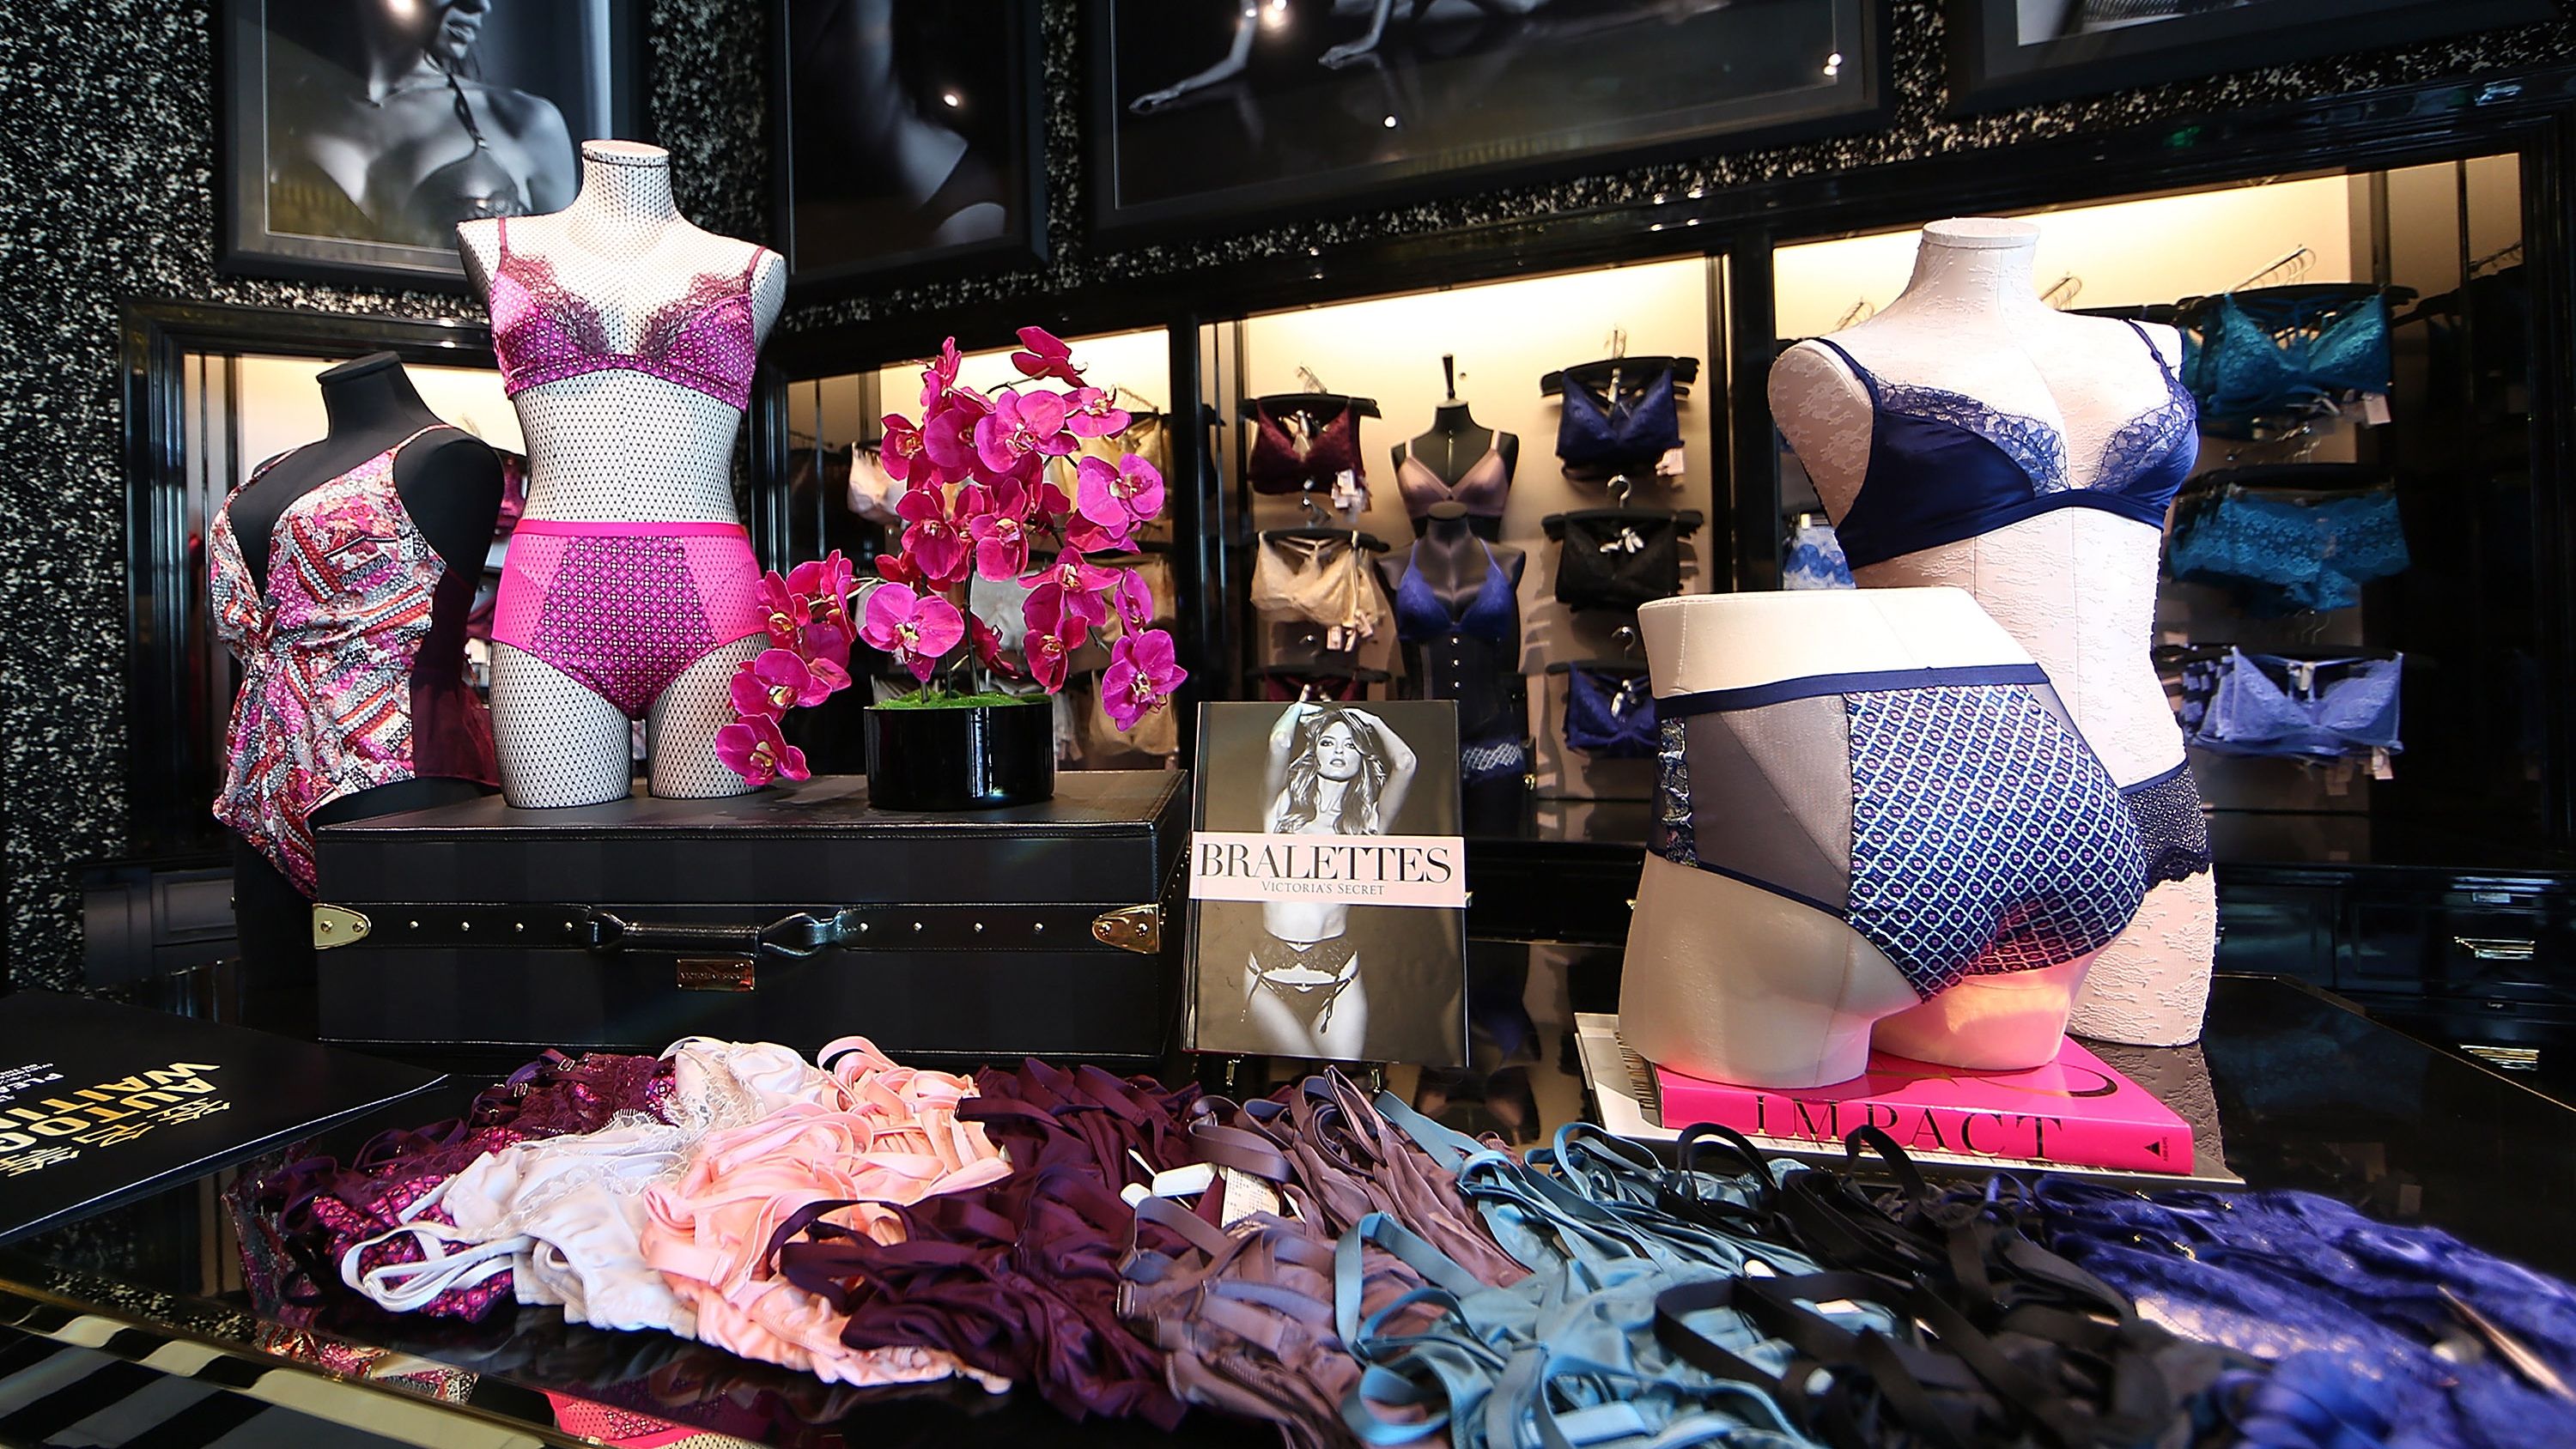 Victoria's Secret is closing up to 50 more stores this year